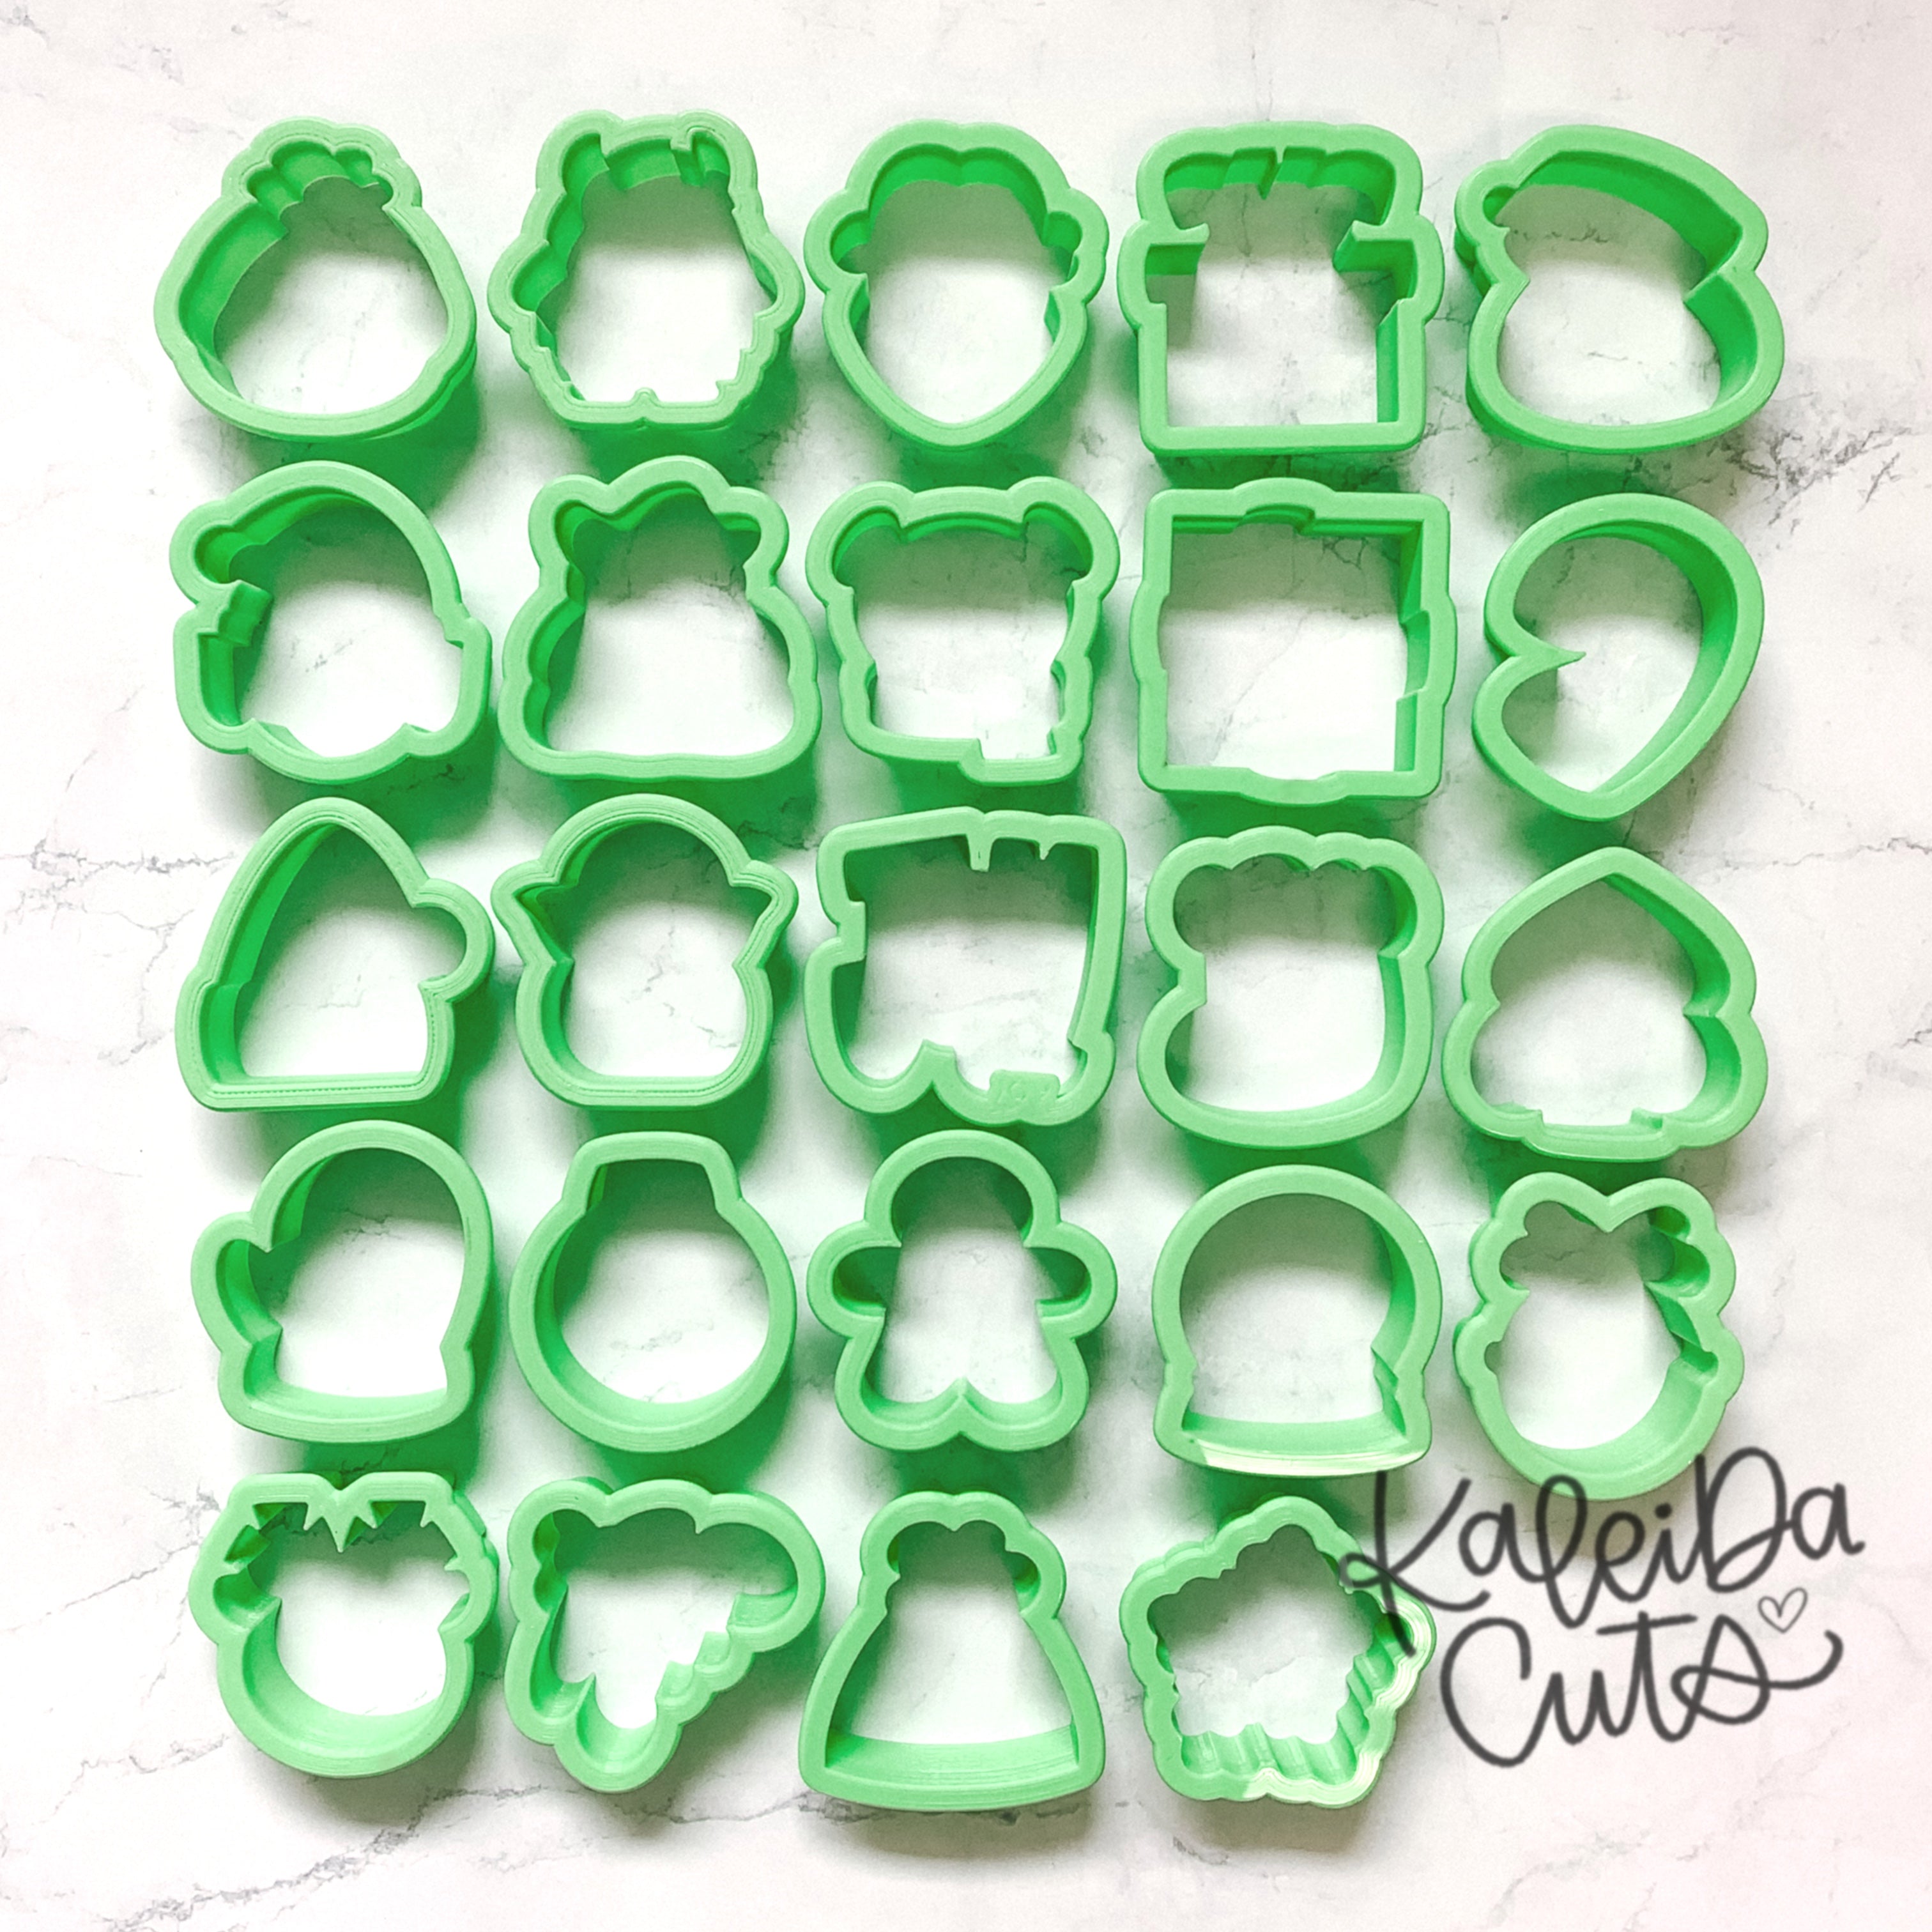 Advent Mini Set of 24 Cookie Cutters